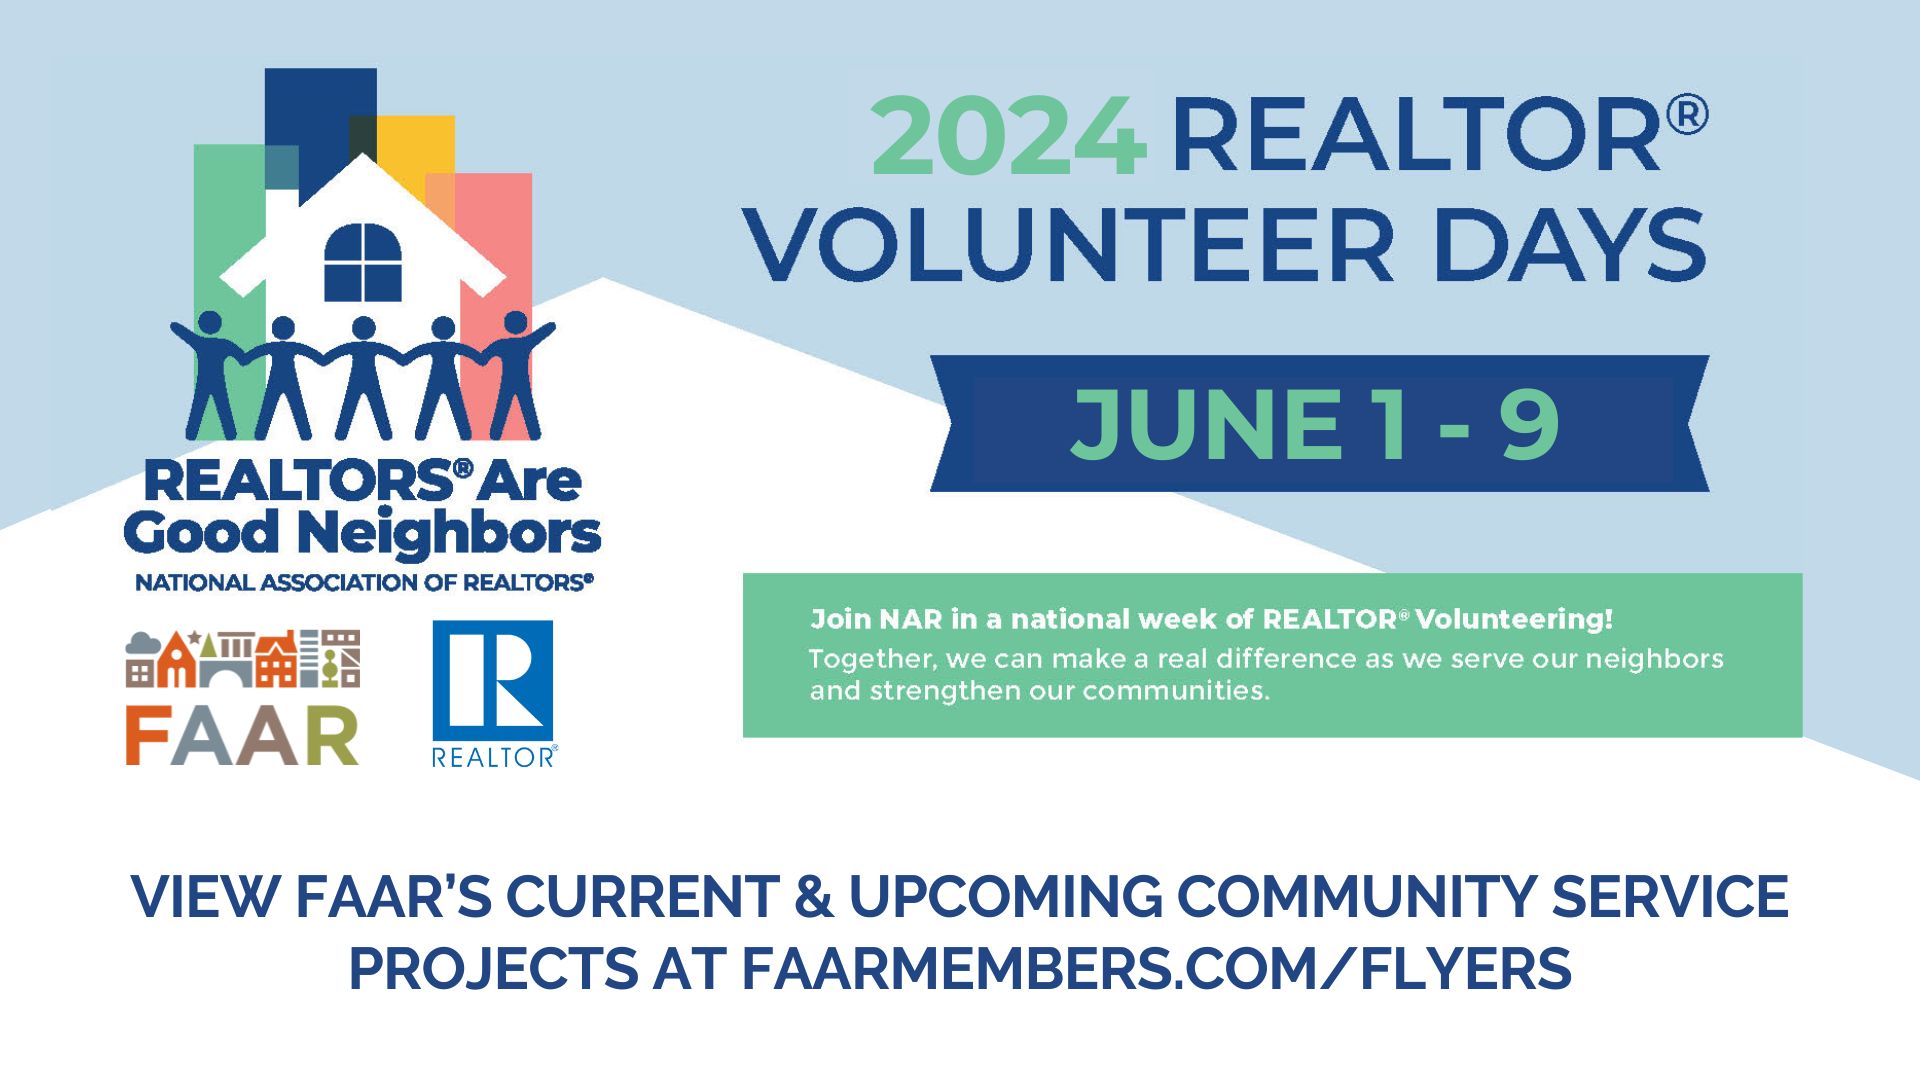 June 1-9 are National REALTORS are good neighbor days. Get involved! 